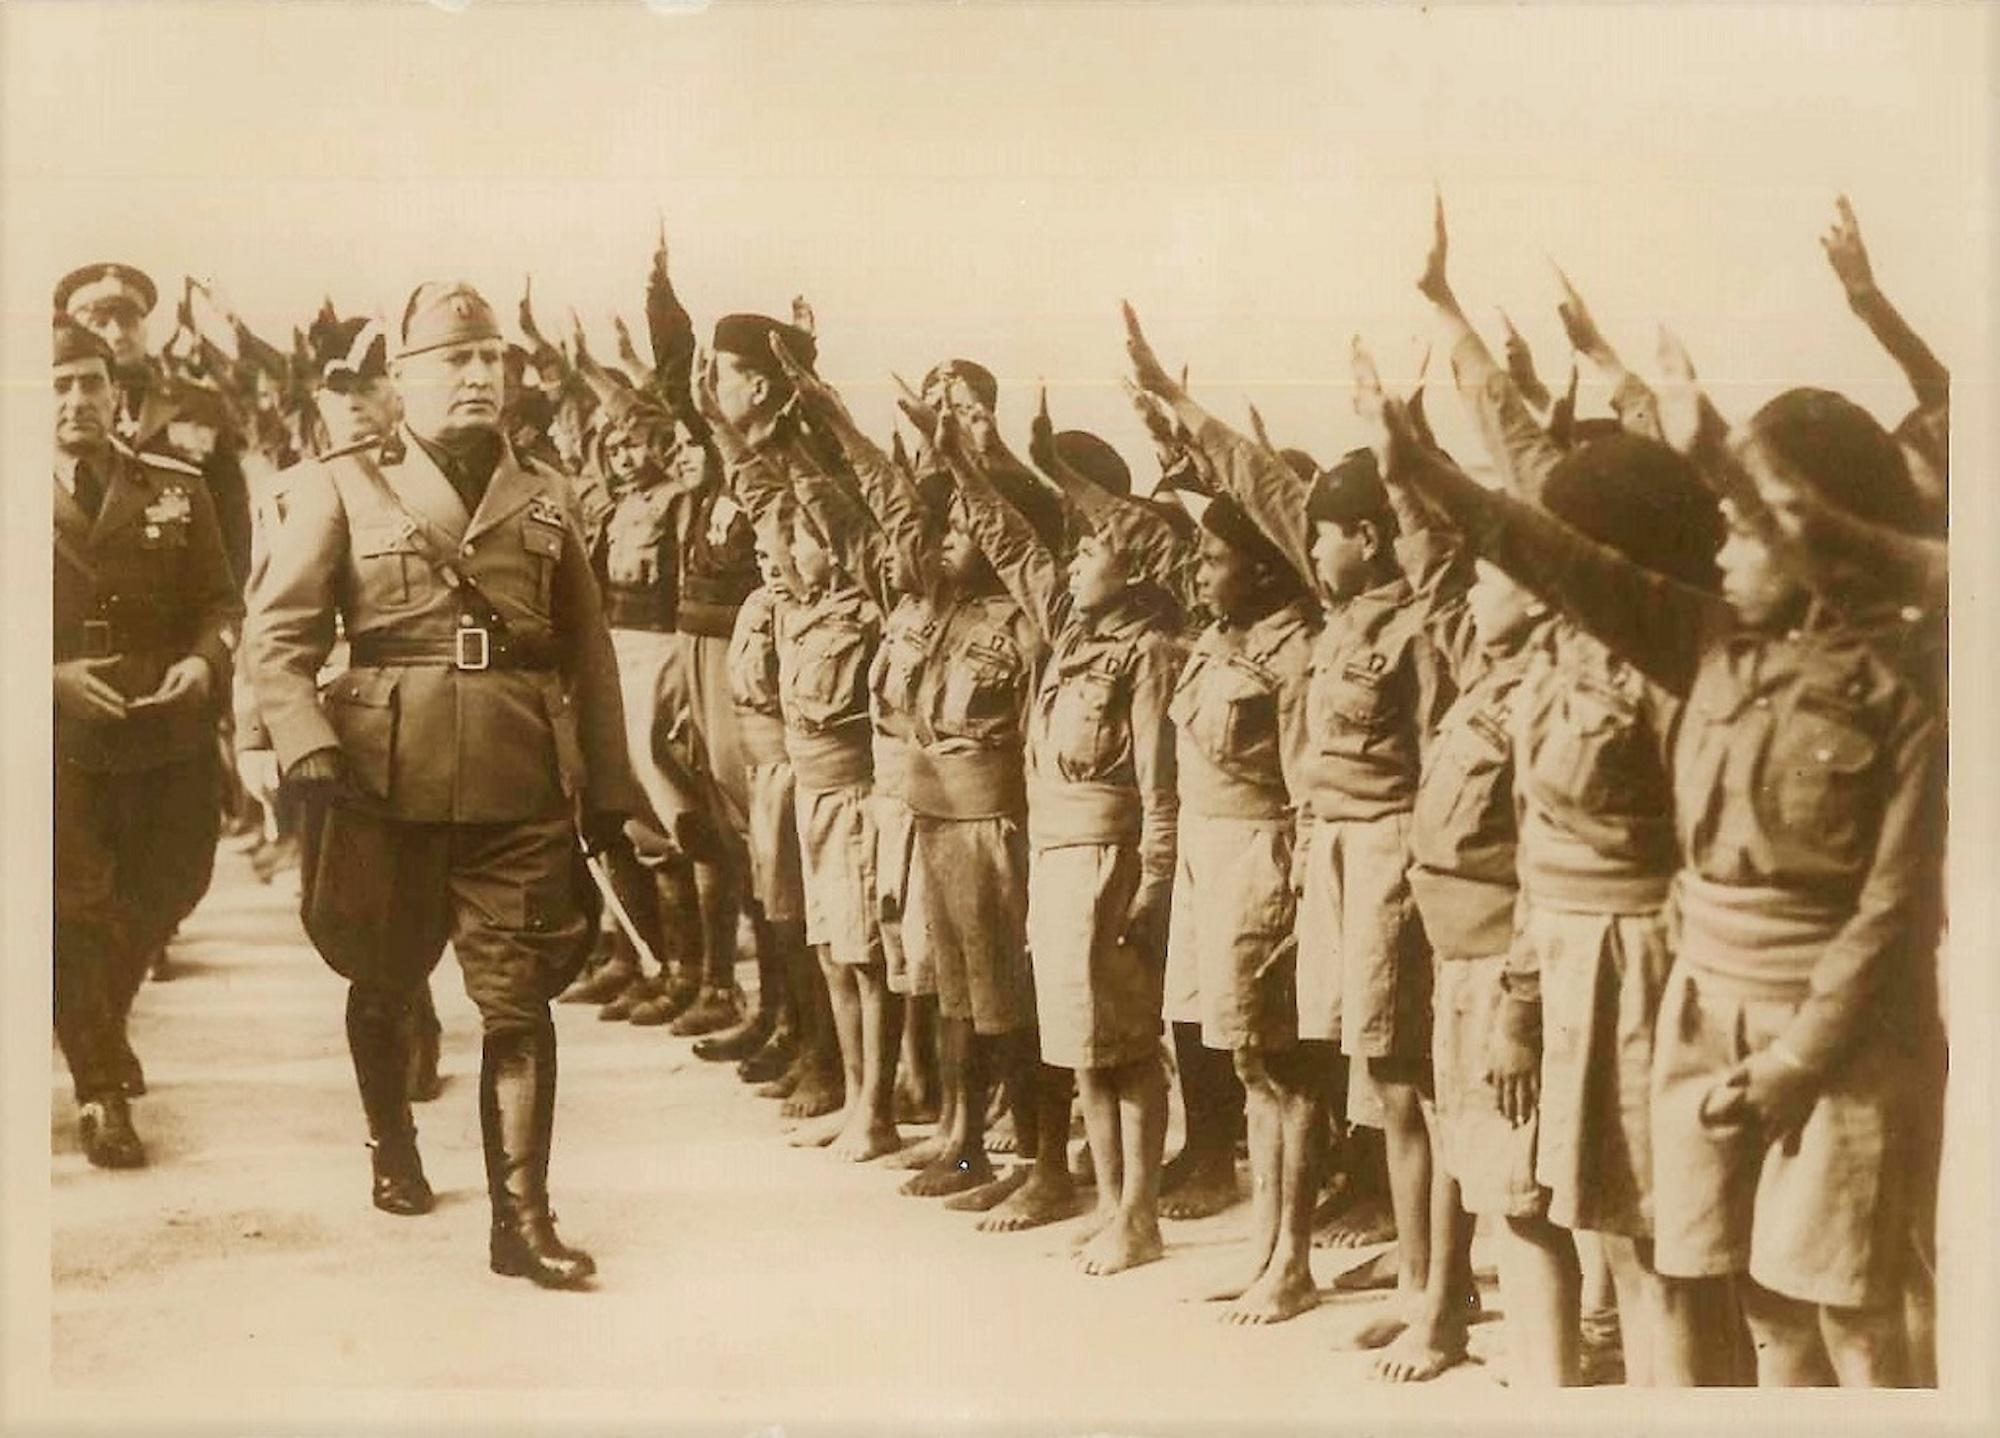 Unknown Black and White Photograph - Mussolini in Libya - Original Vintage Photo - 1937